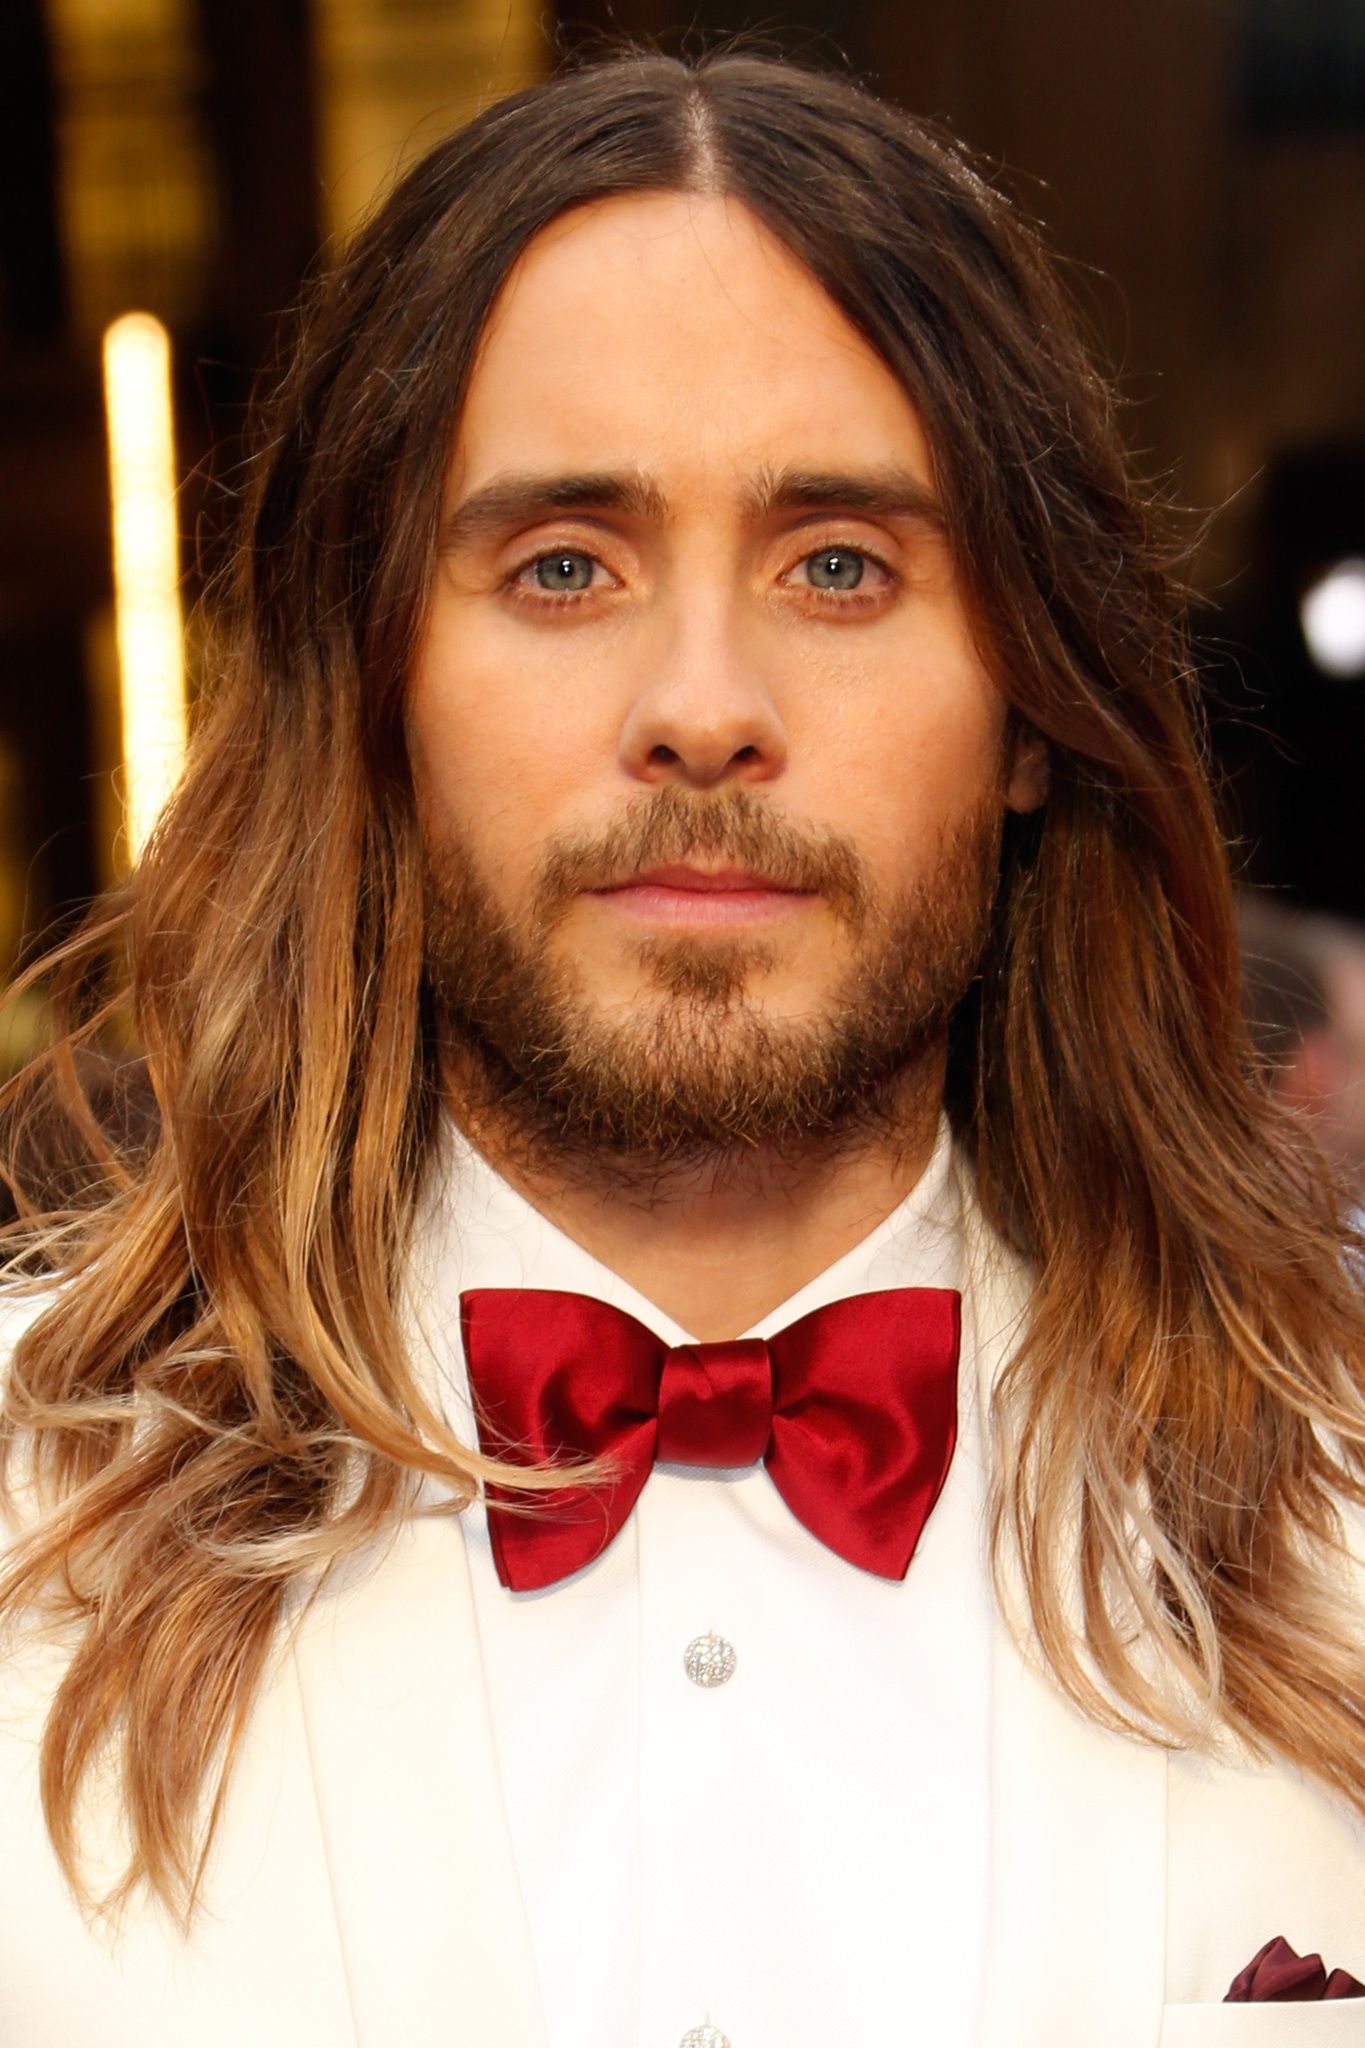 Jared Leto Wiki [Actor], Biography, Net worth, Height, Weight, Wife